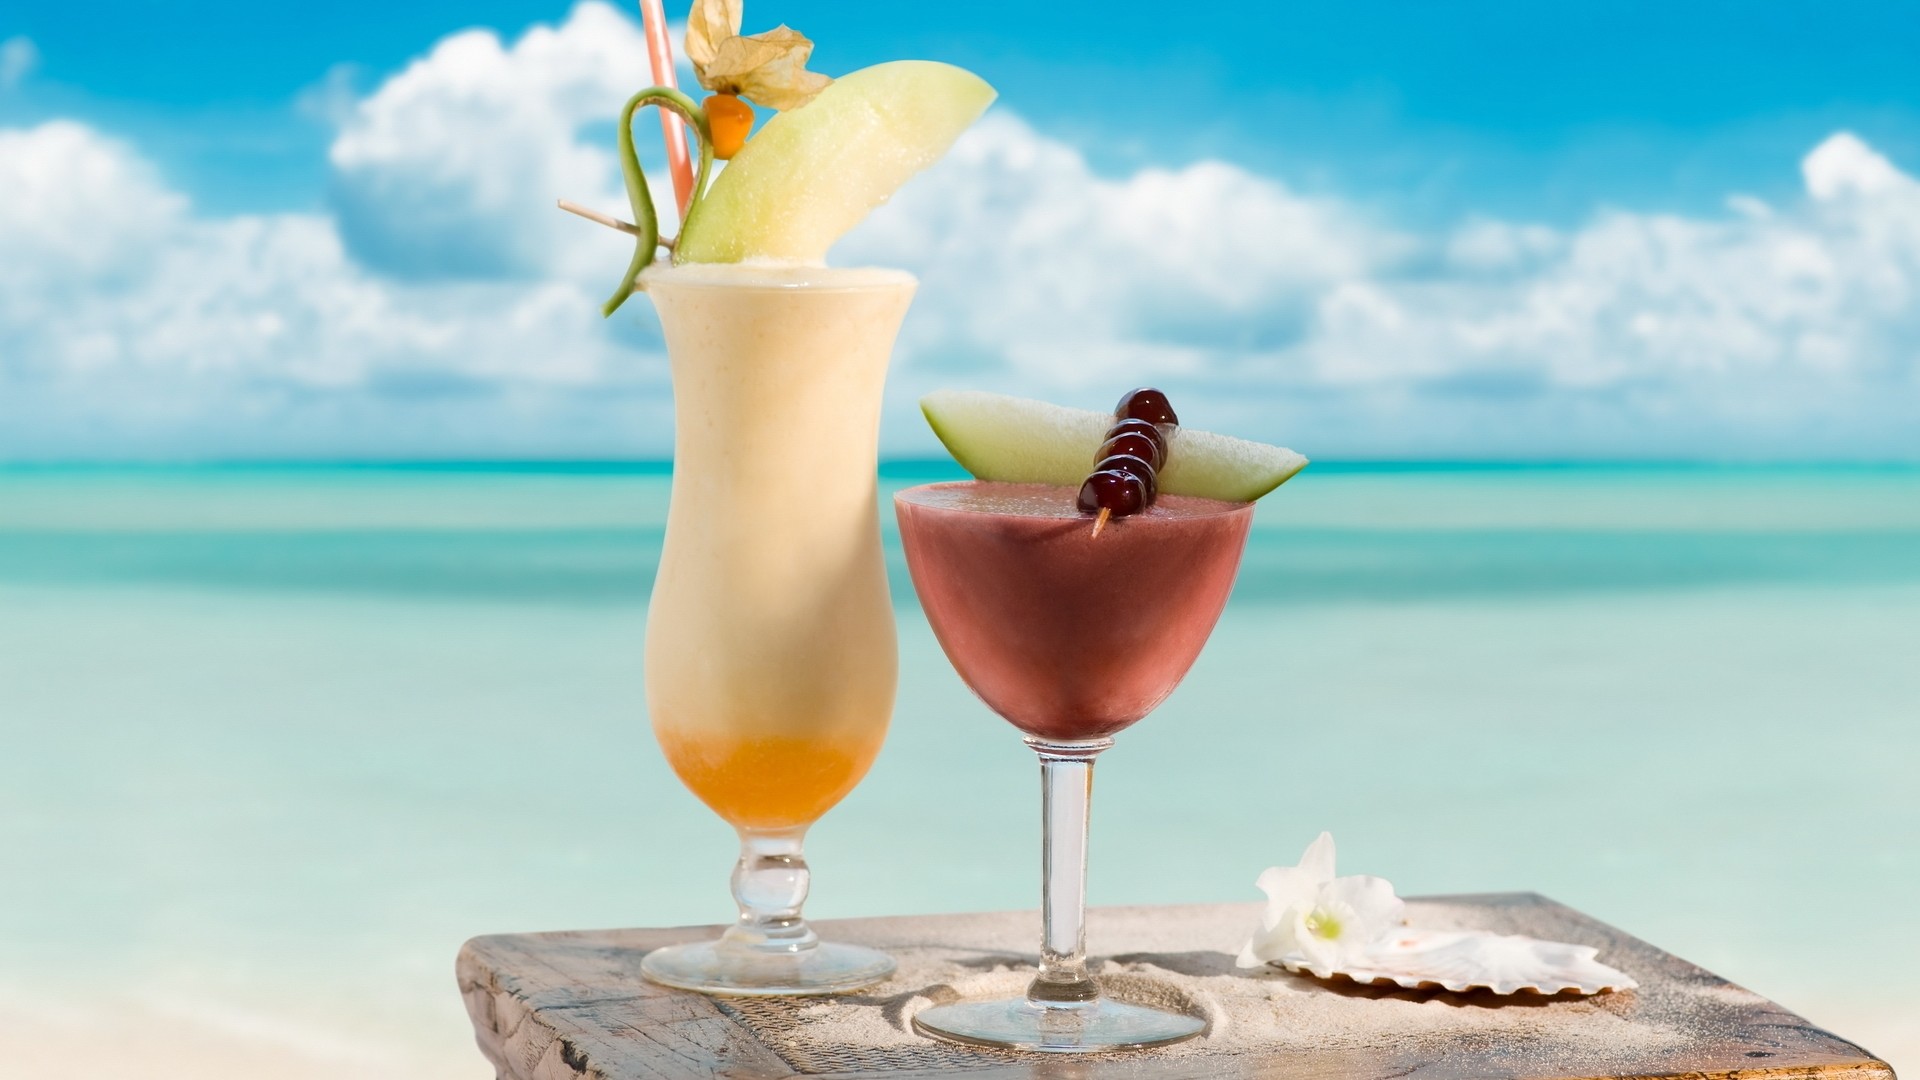 1920x1080 beach-drinks-best-hd-wallpapers-free-downloaded-for-